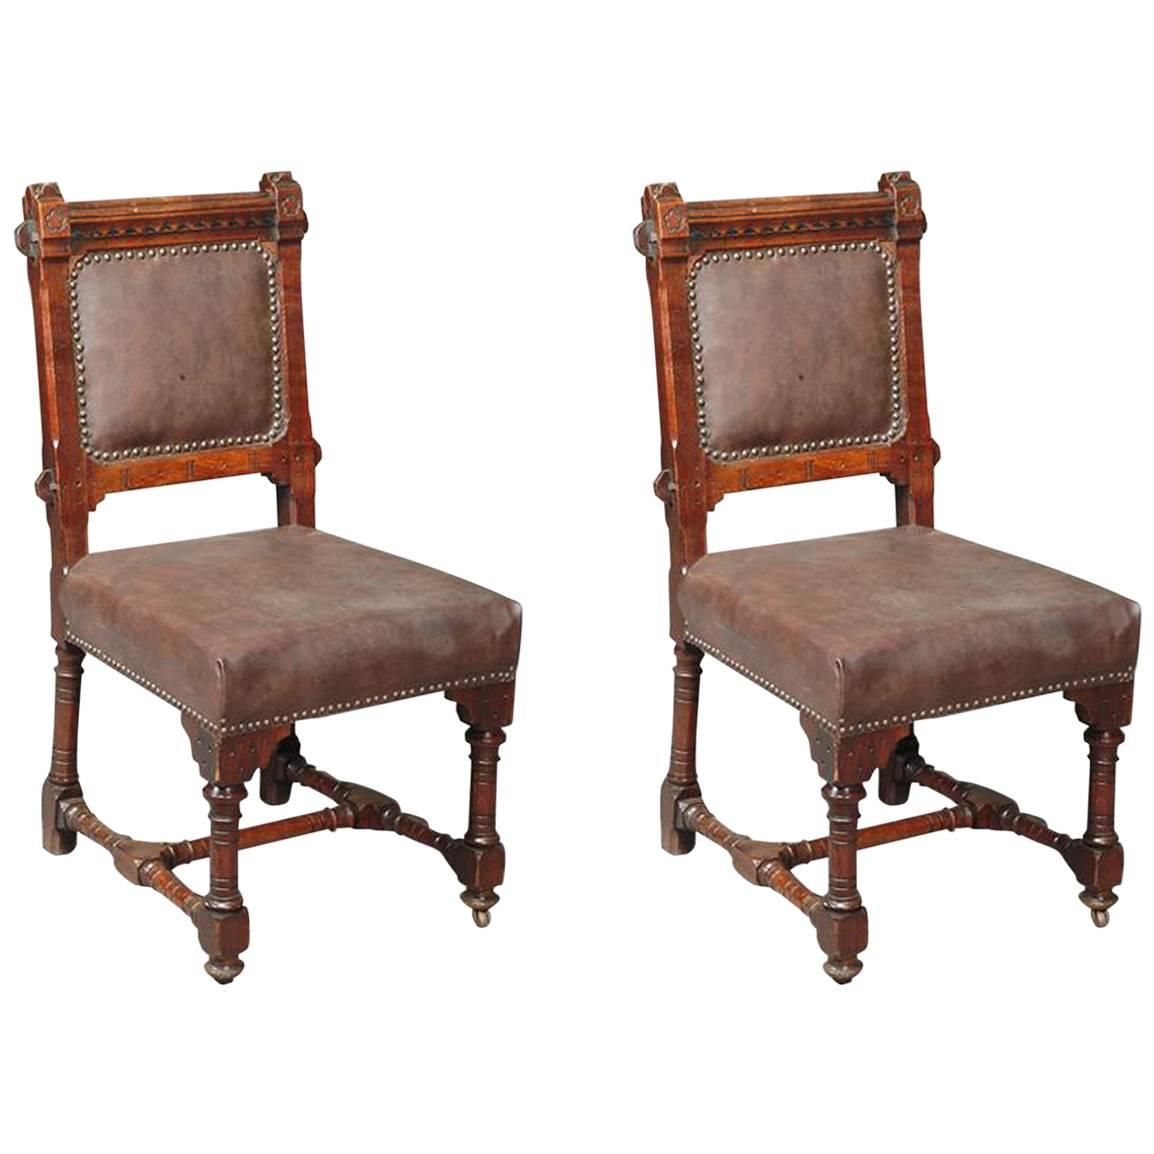 John Pollard Seddon A pair of Gothic Revival oak dining chairs. 4 more available